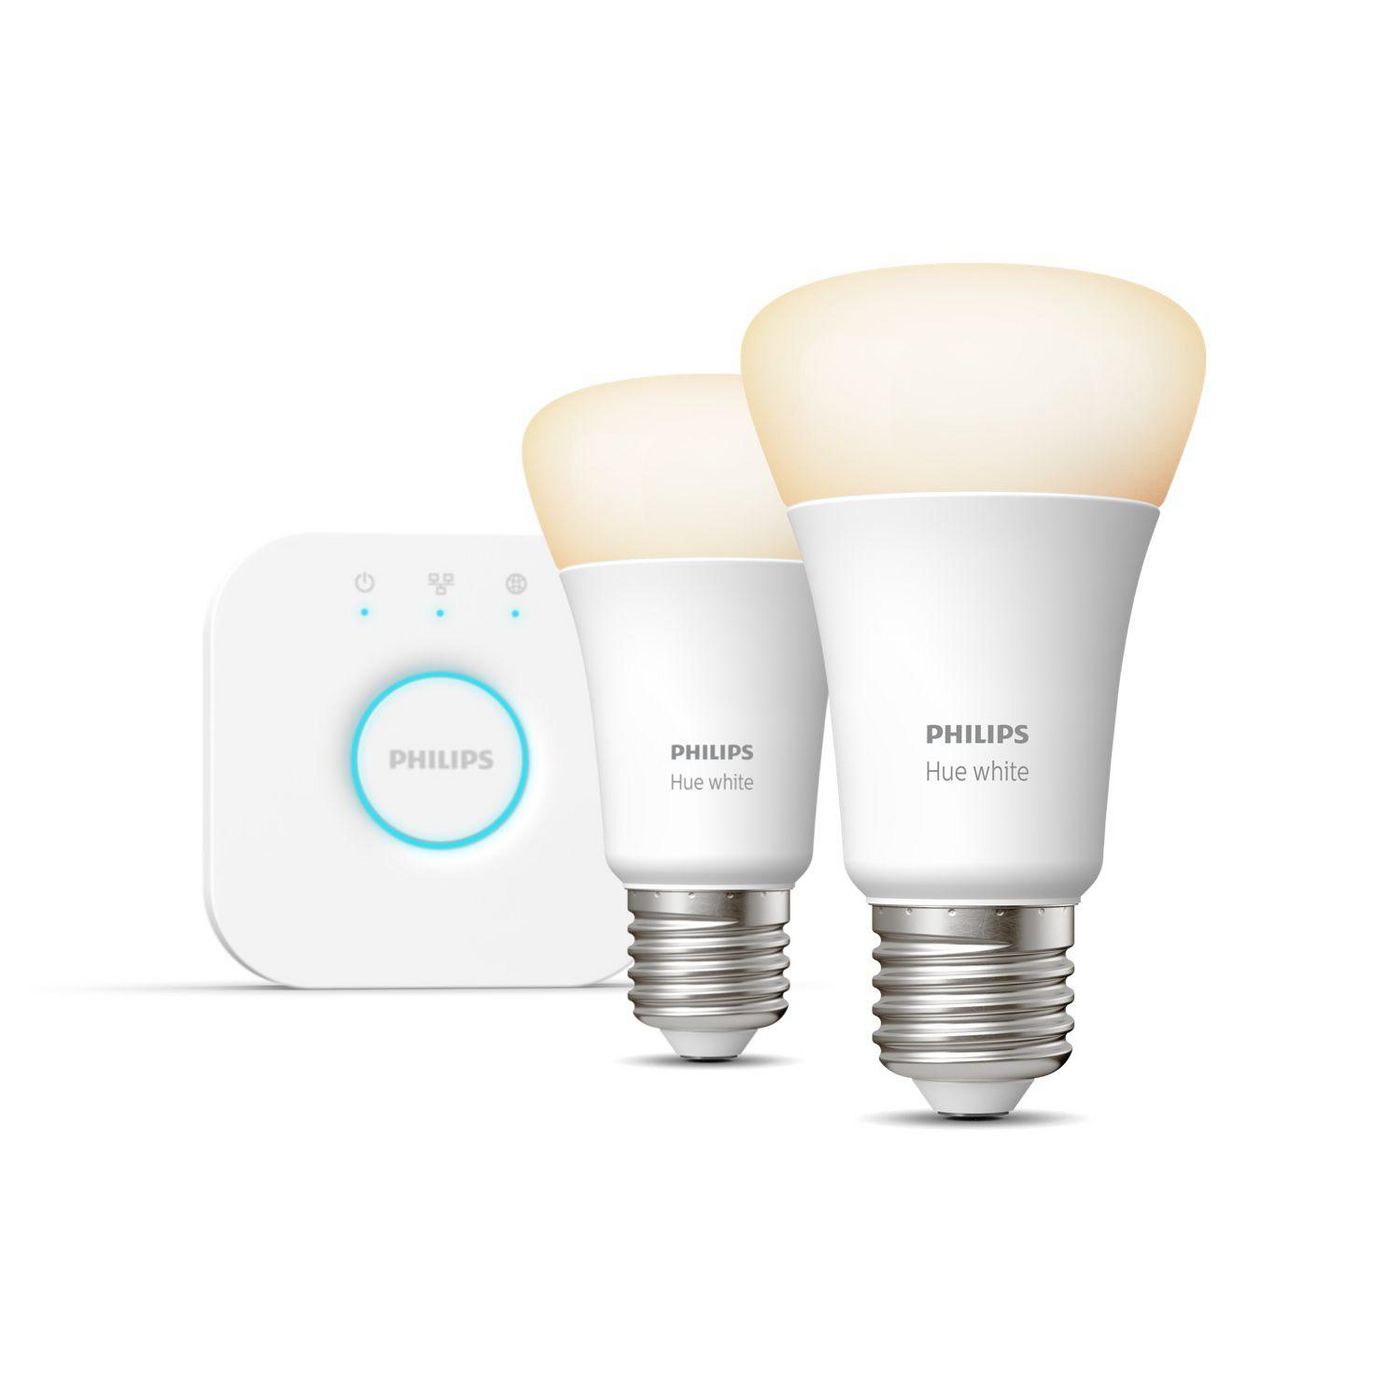 Philips-by-Signify 929001821601 Hue White 2xE27 Bulbr Starter 